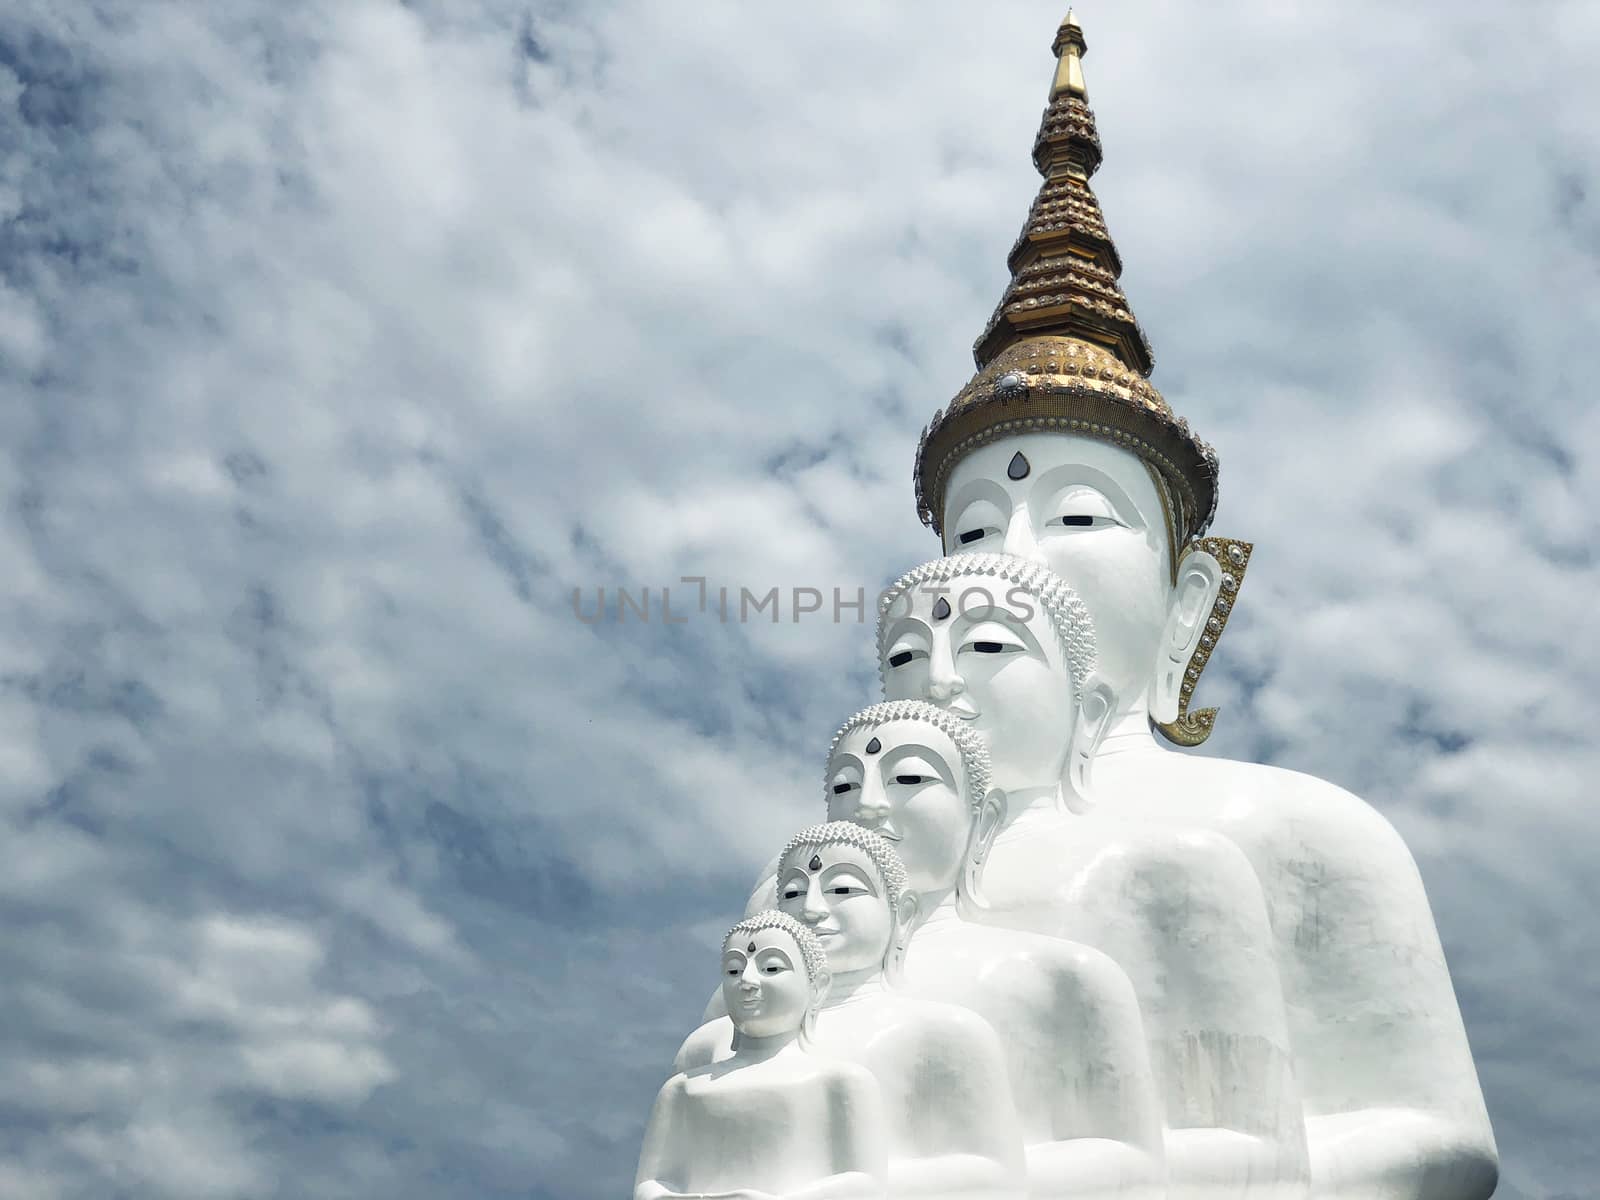 White Buddha Statue and cloud background at Wat Prathat Phasornk by Surasak